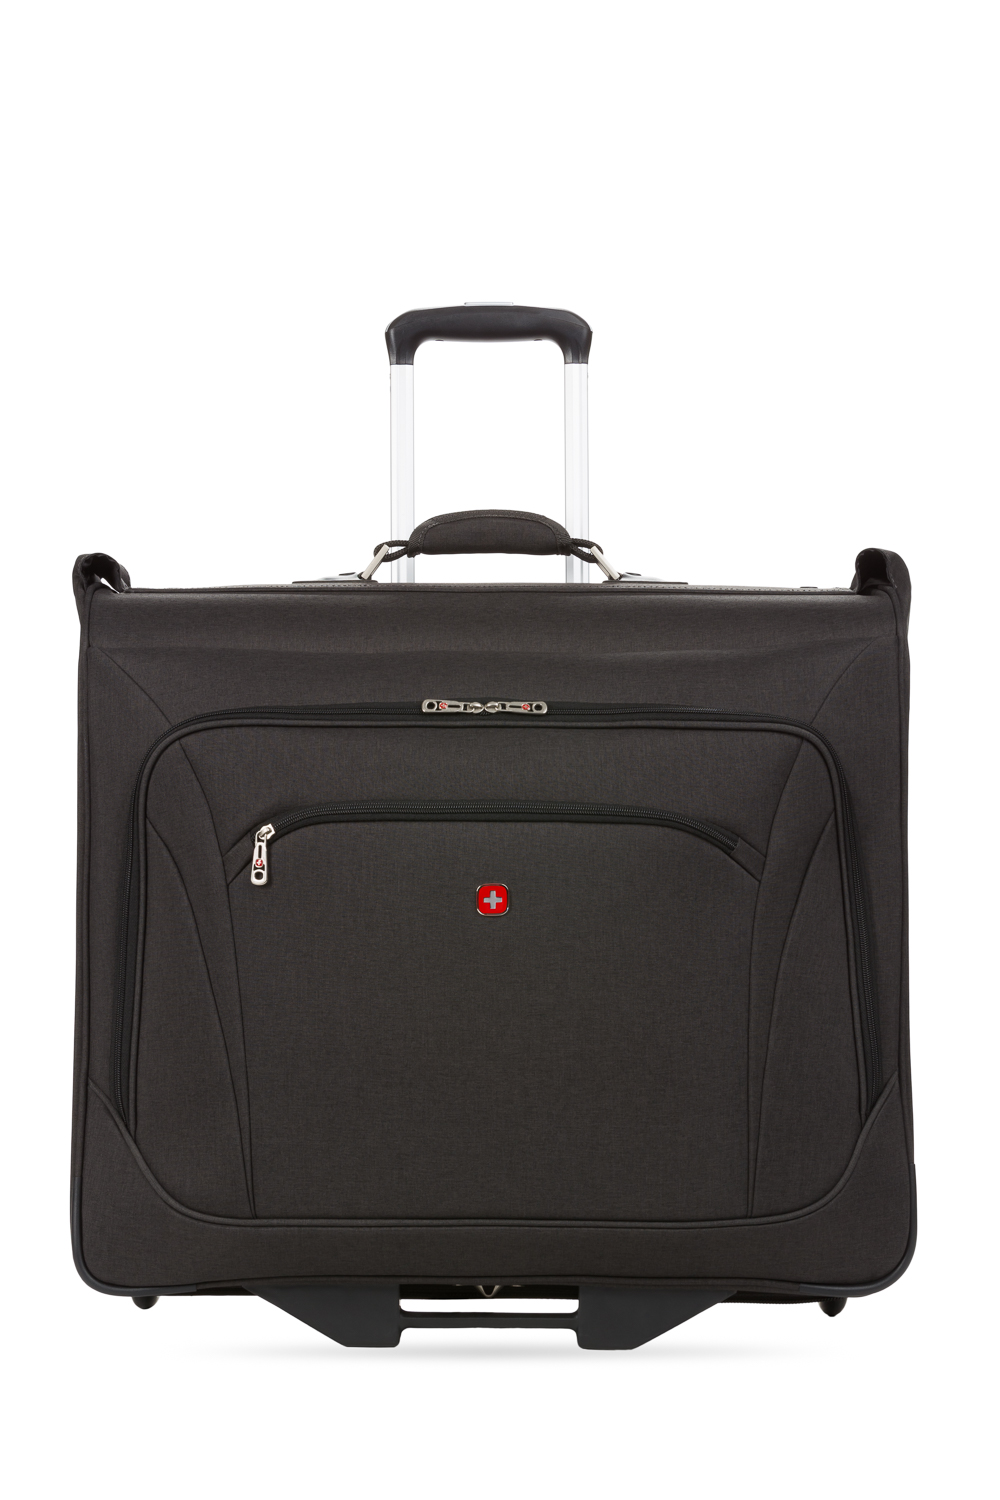 Black 50-Inch Length Accommodates Suits & Business Attire One Size Swiss Gear Folding Carry On Garment Bag with Pockets 